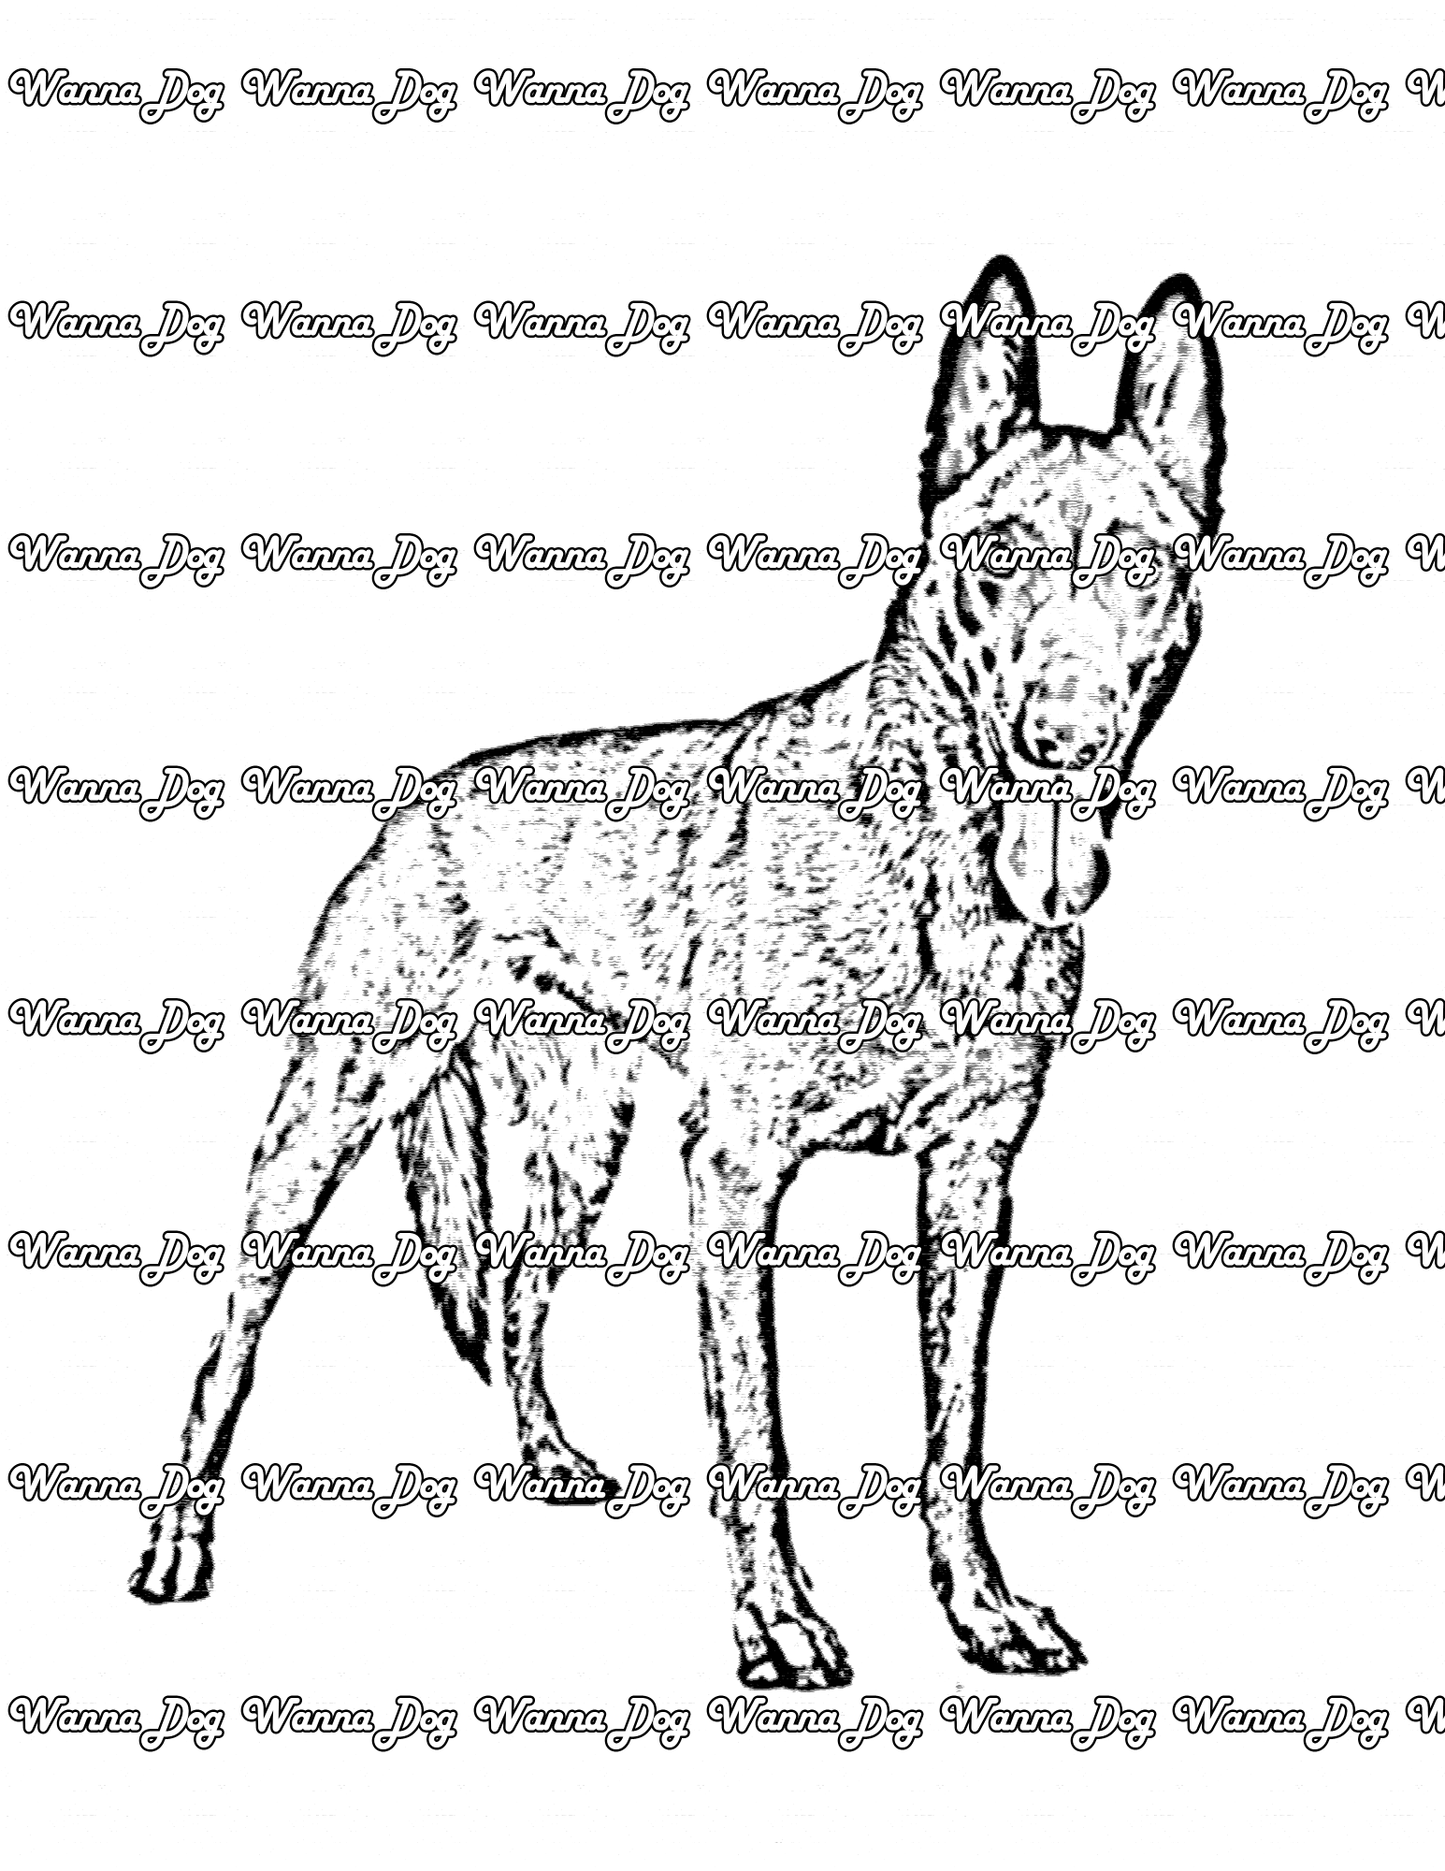 Belgian Malinois Coloring Page of a Belgian Malinois standing with their tongue out